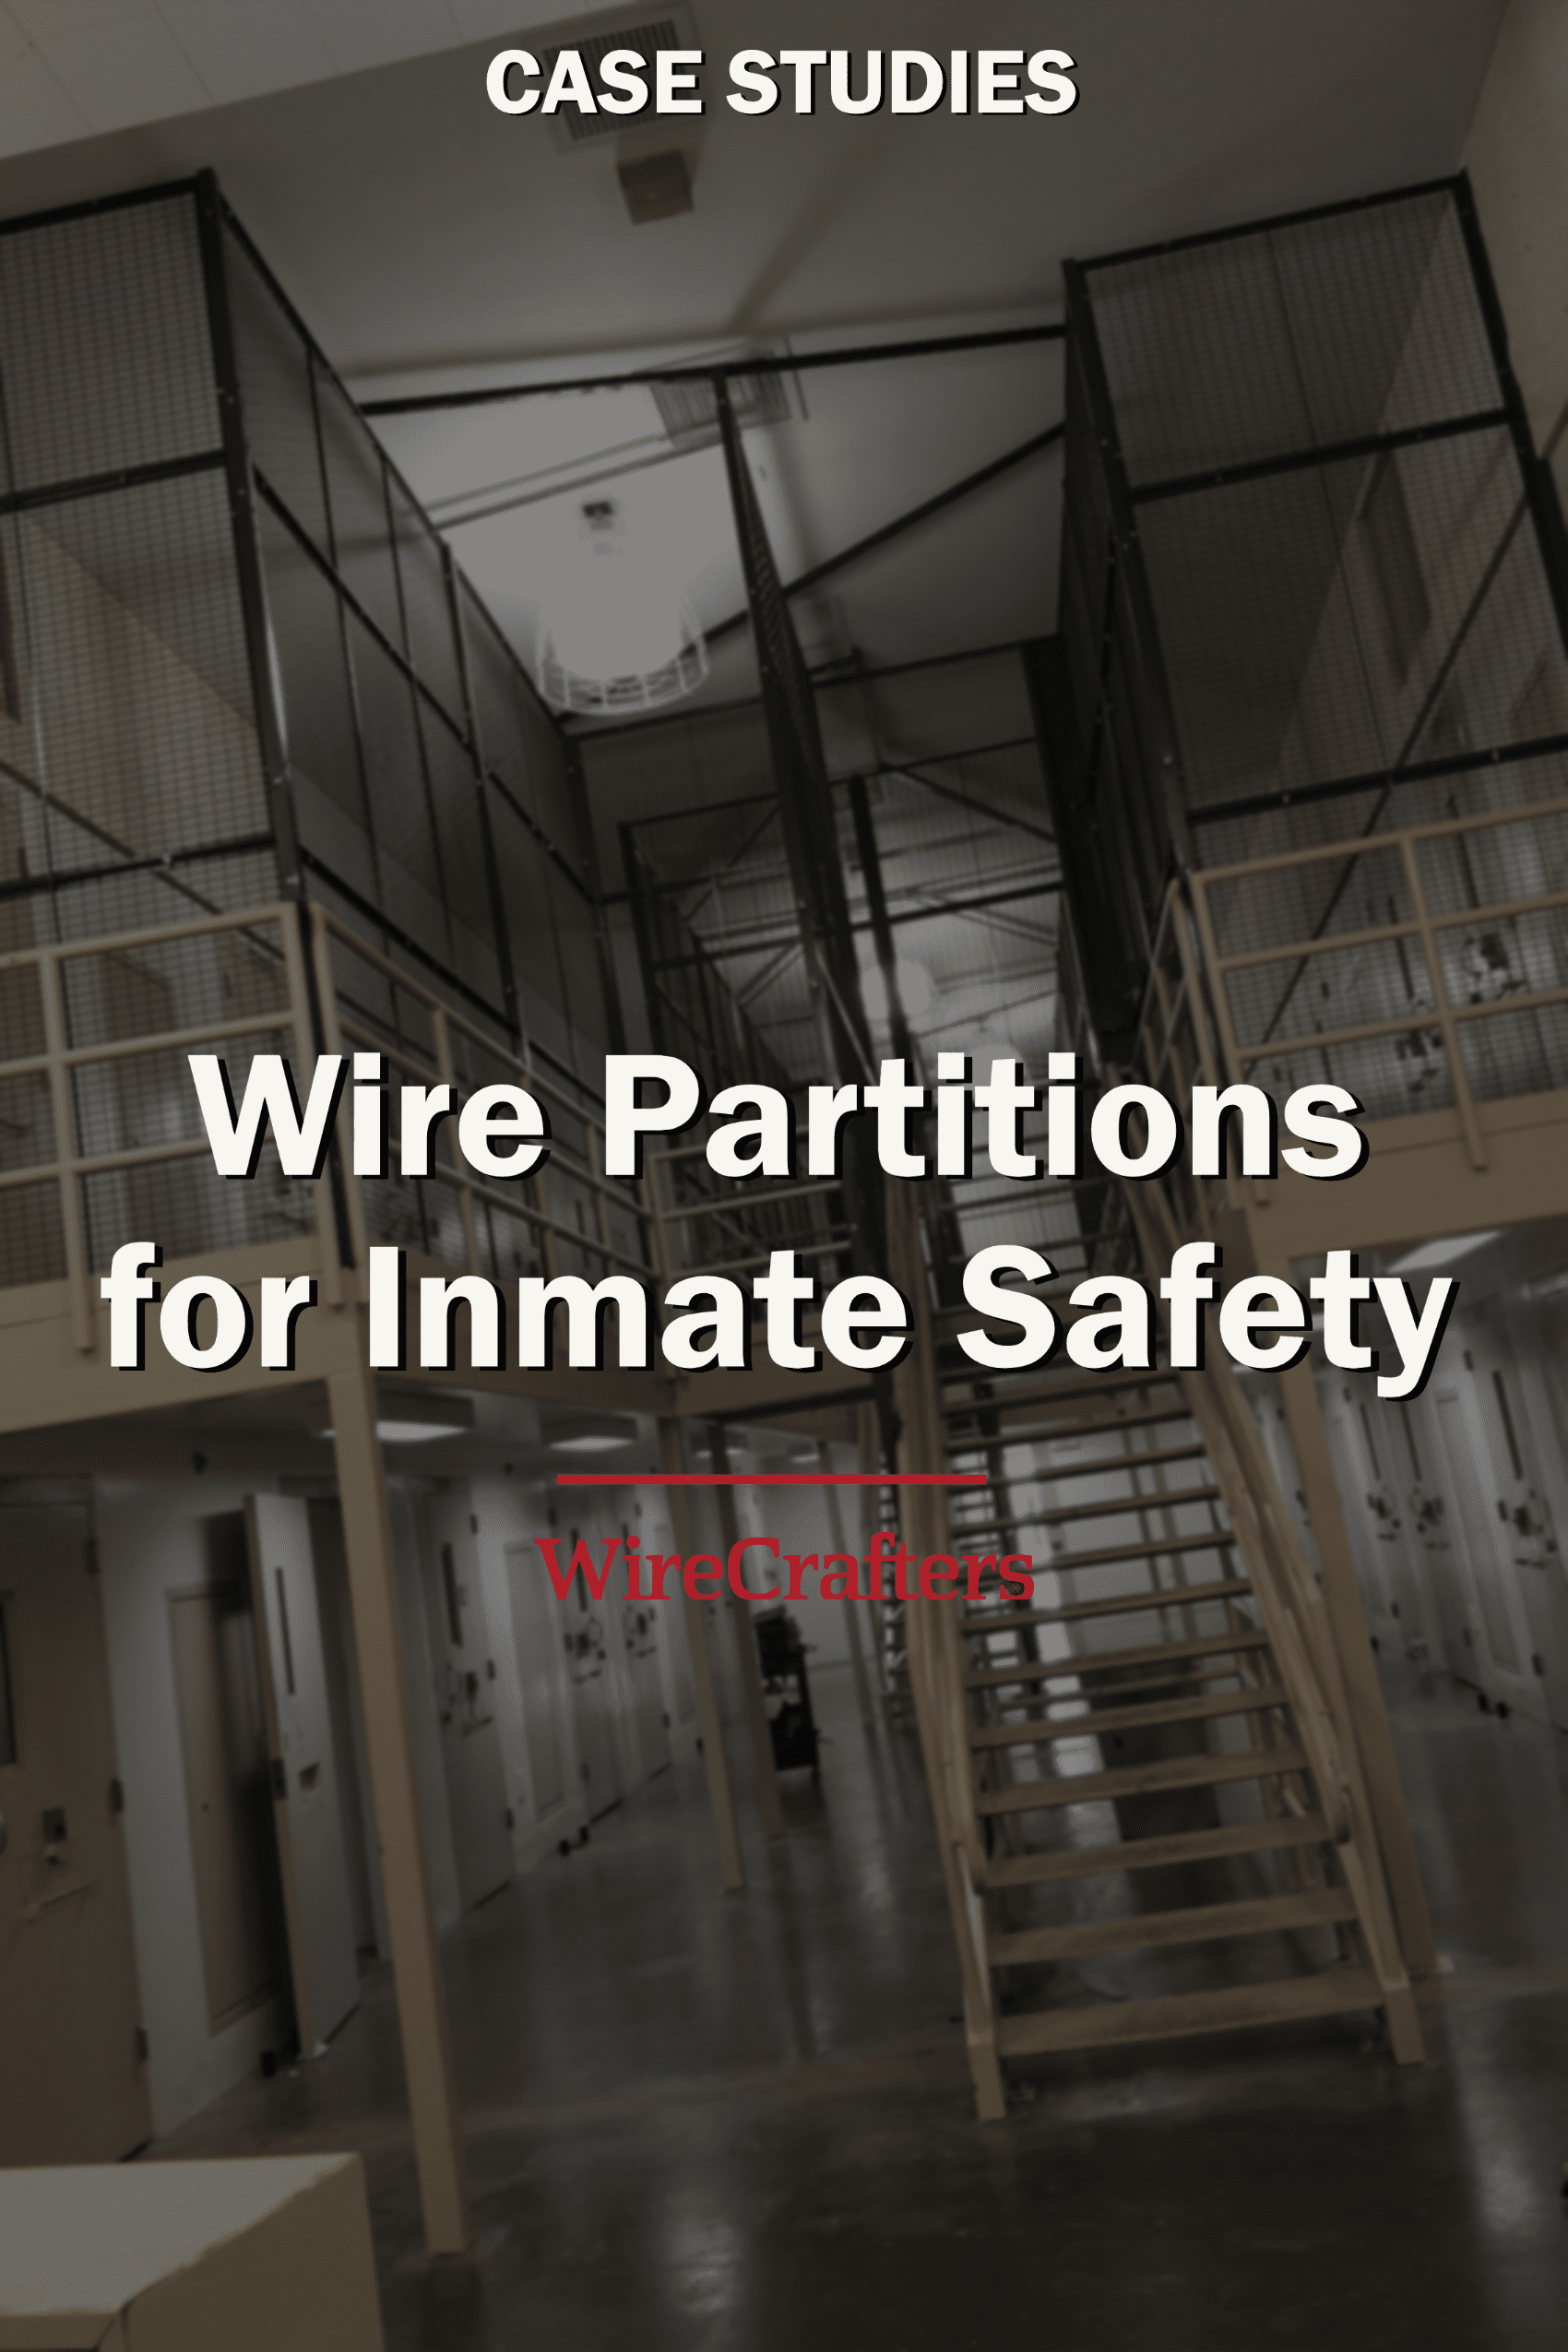 Wire Partitions Inmate Safety thumbnail